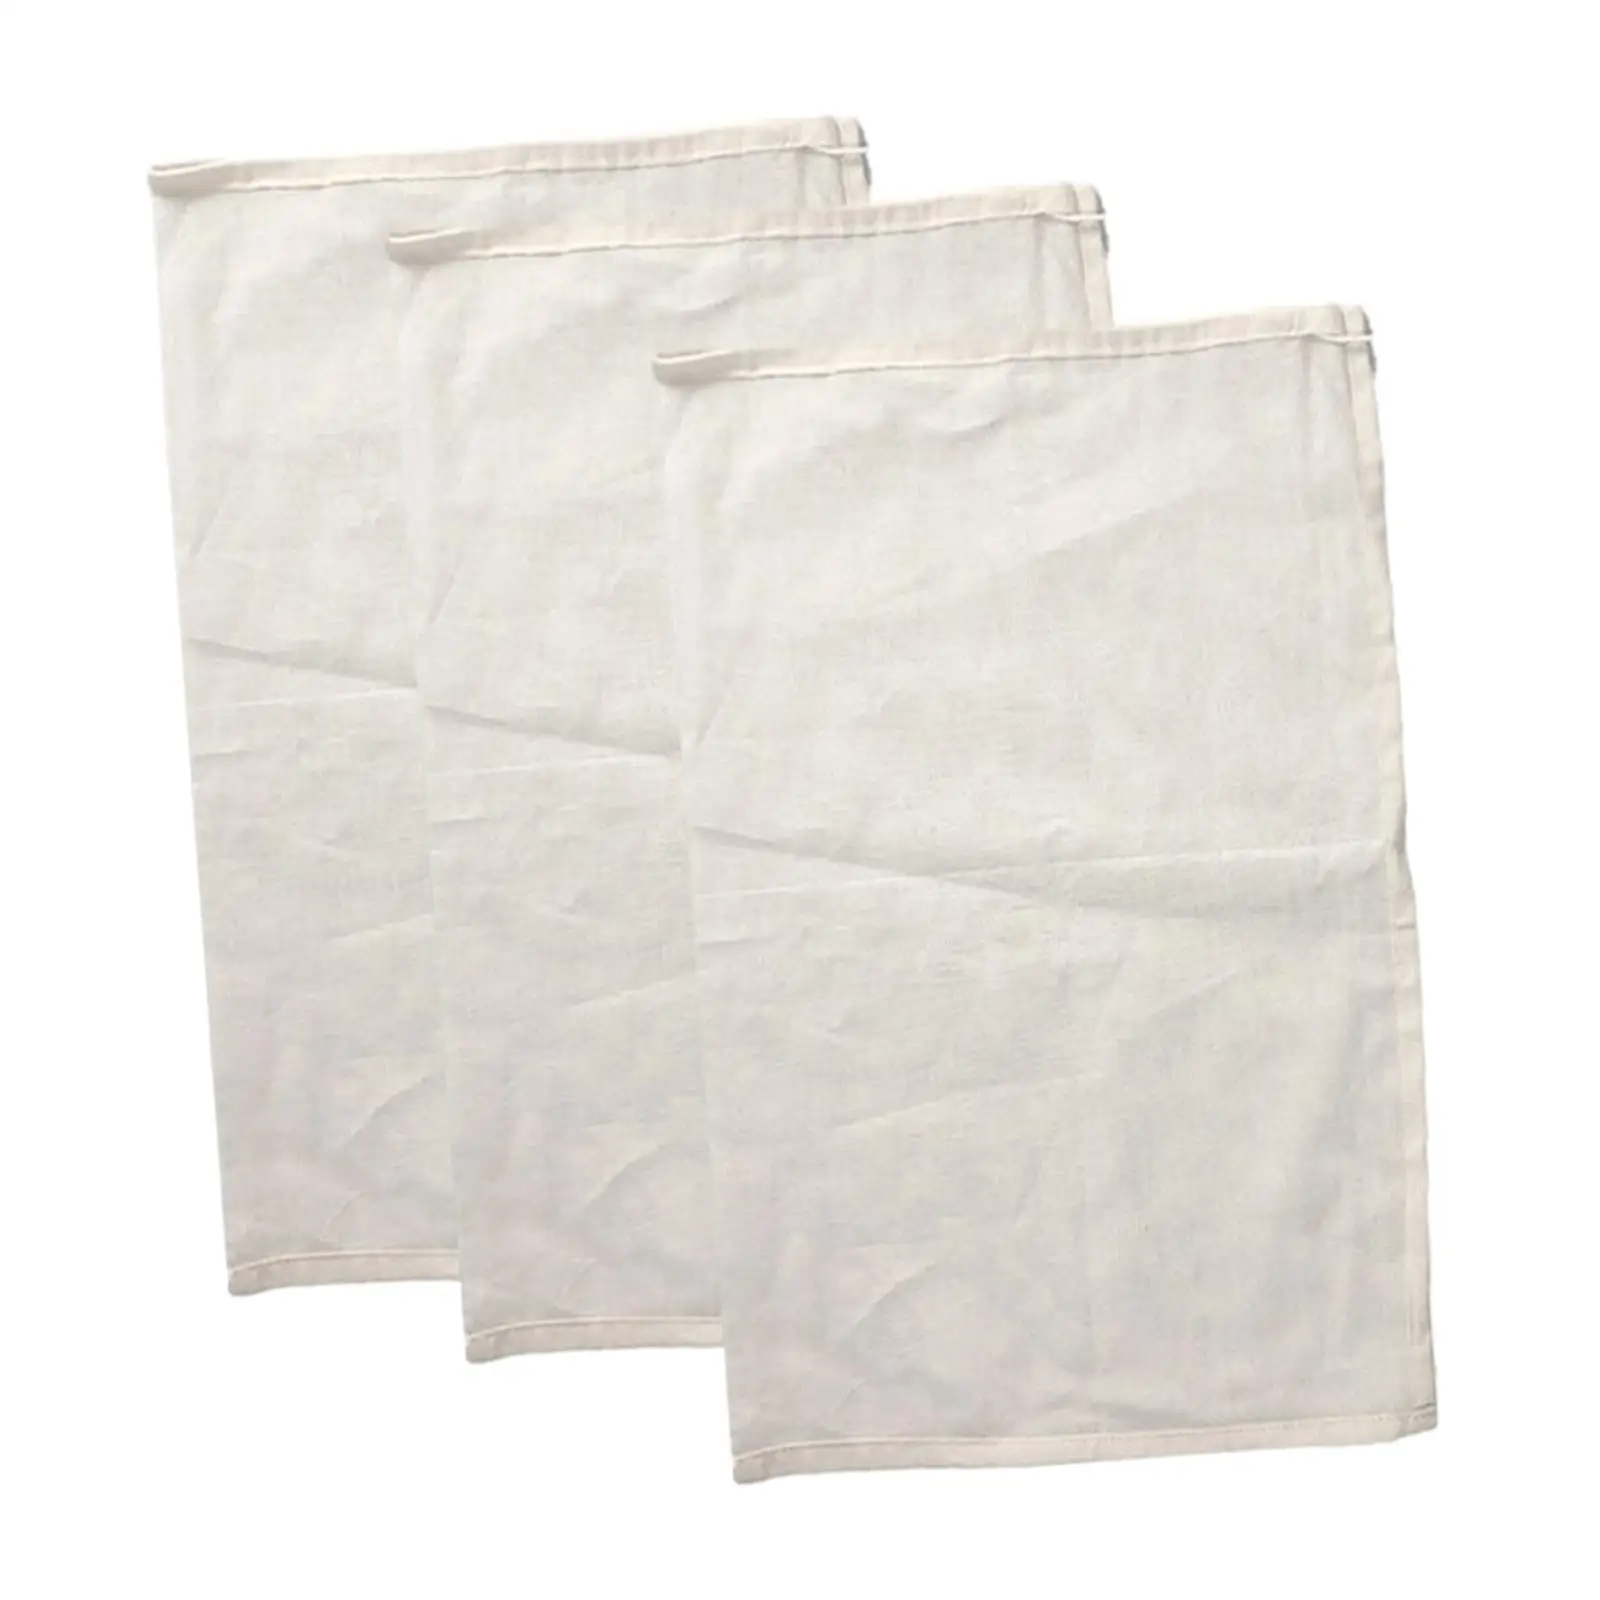 3 Pieces Nut Milk Bag Reusable Fine Mesh Portable Soup Bag Cheesecloth Bags for Spice Food Soy Milk Vegetables Coffee